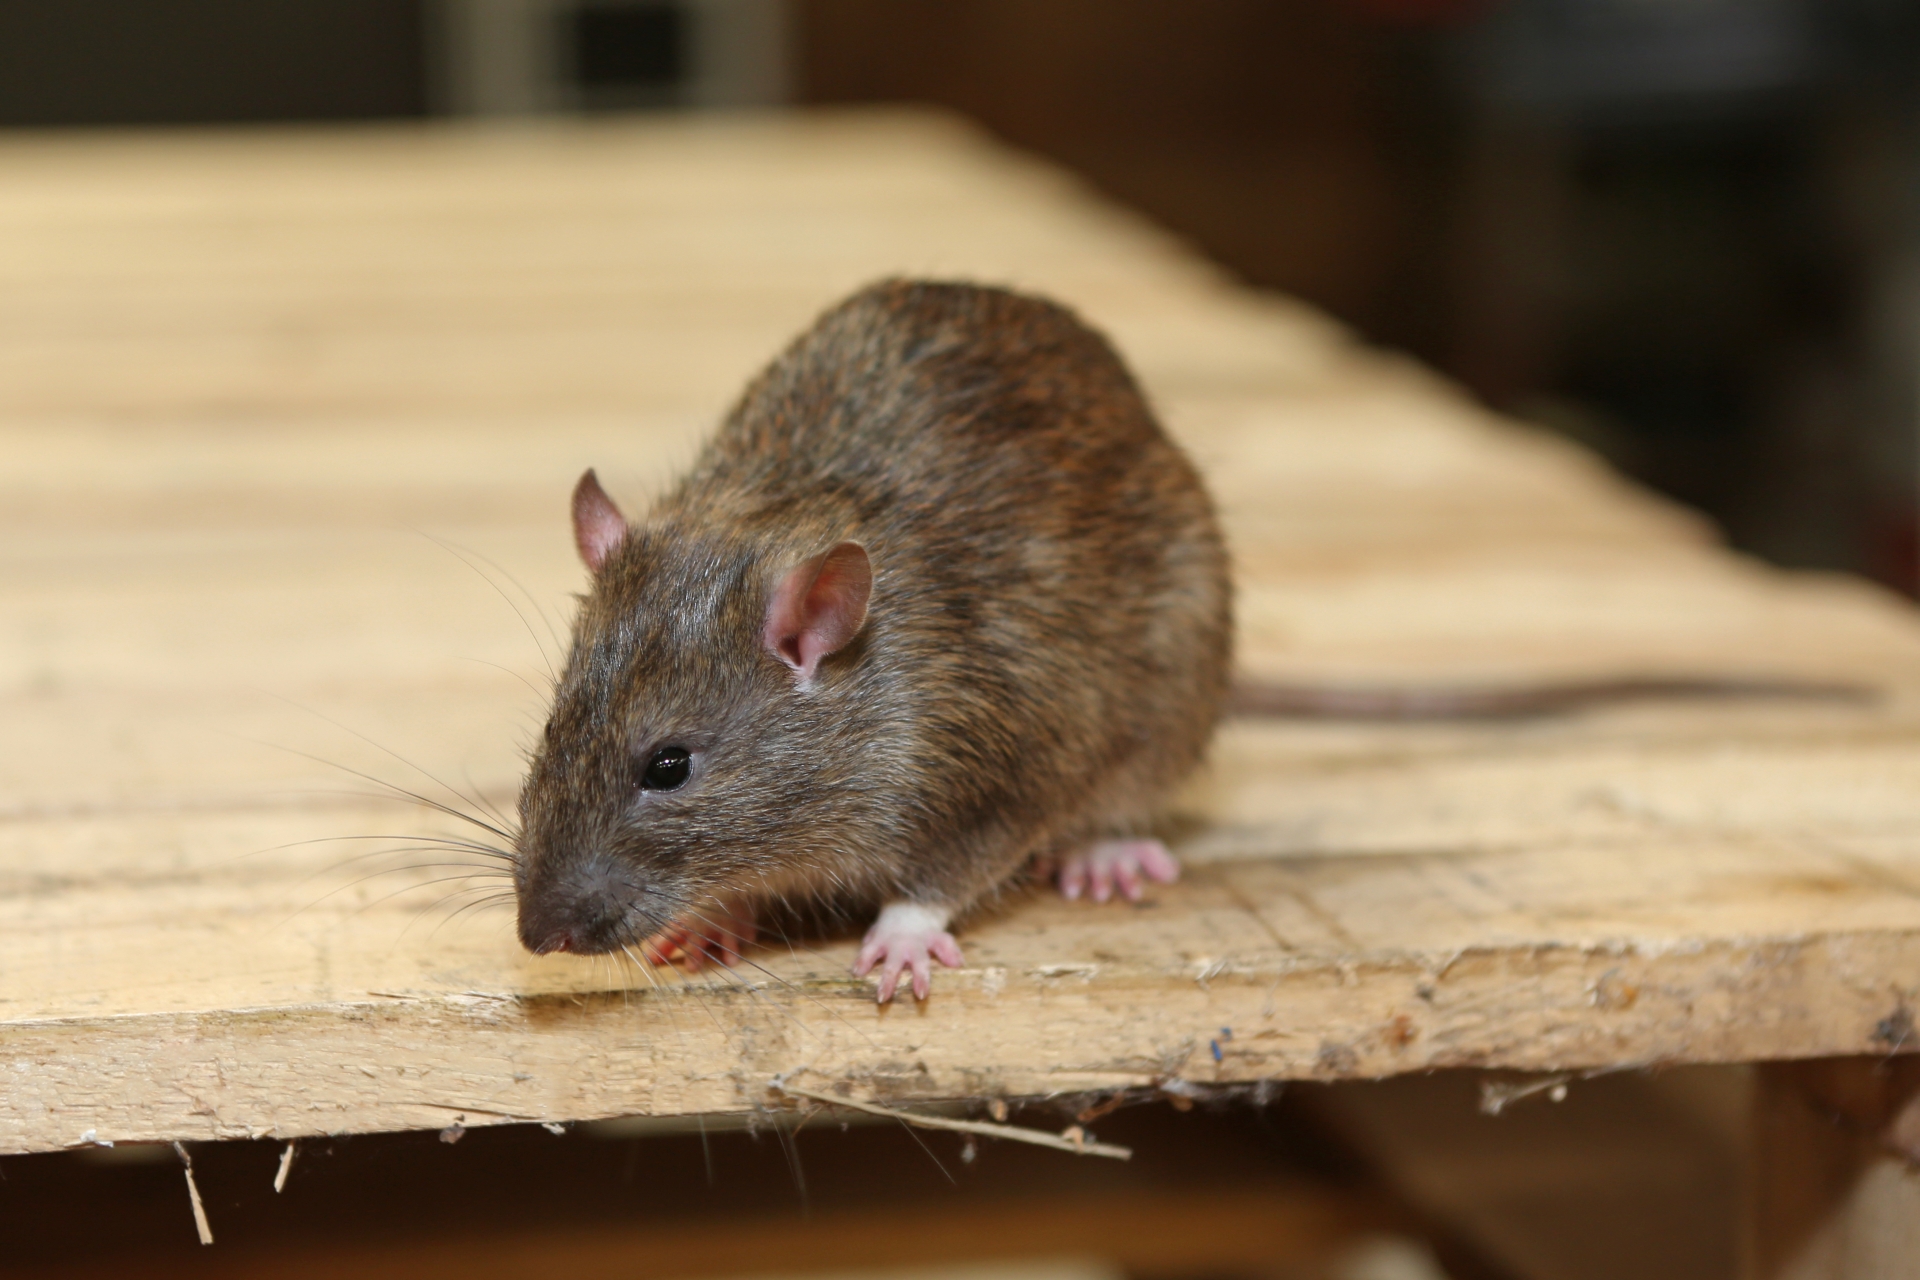 Rat extermination, Pest Control in North Feltham, East Bedfont, TW14. Call Now 020 8166 9746